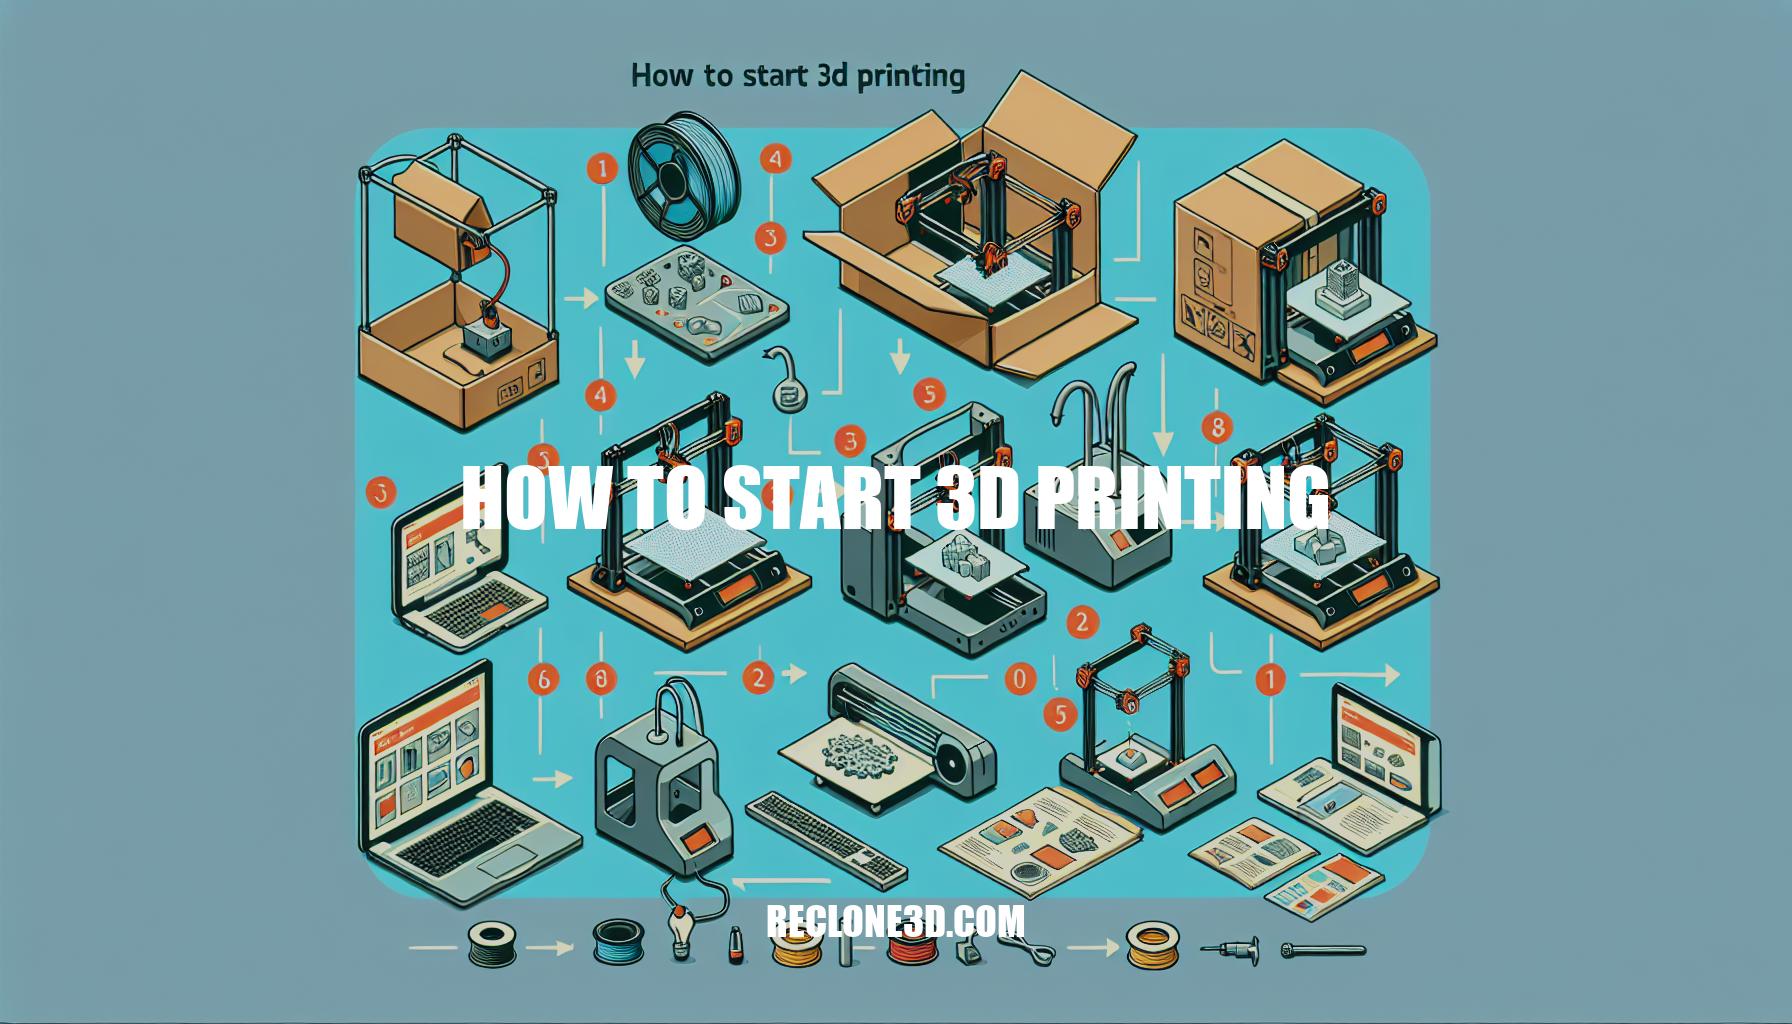 How to Start 3D Printing Guide